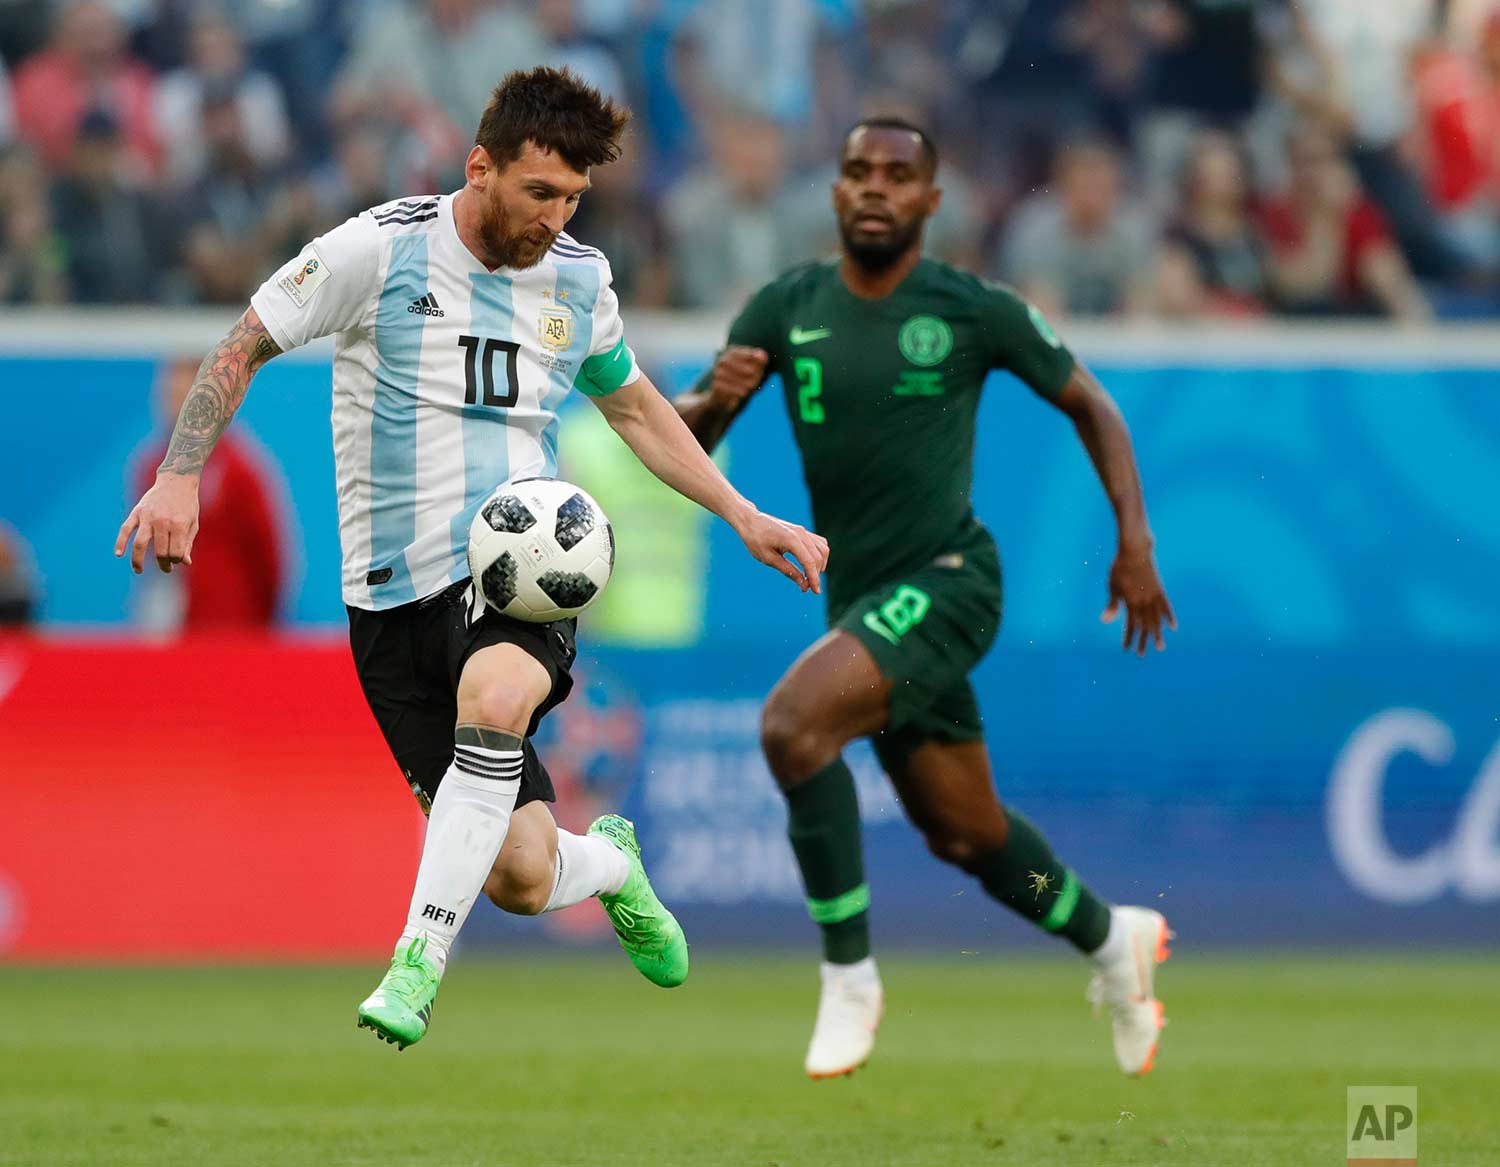  Argentina's Lionel Messi controls the ball during the group D match between Argentina and Nigeria, at the 2018 soccer World Cup in the St. Petersburg Stadium in St. Petersburg, Russia, Tuesday, June 26, 2018. (AP Photo/Ricardo Mazalan) 